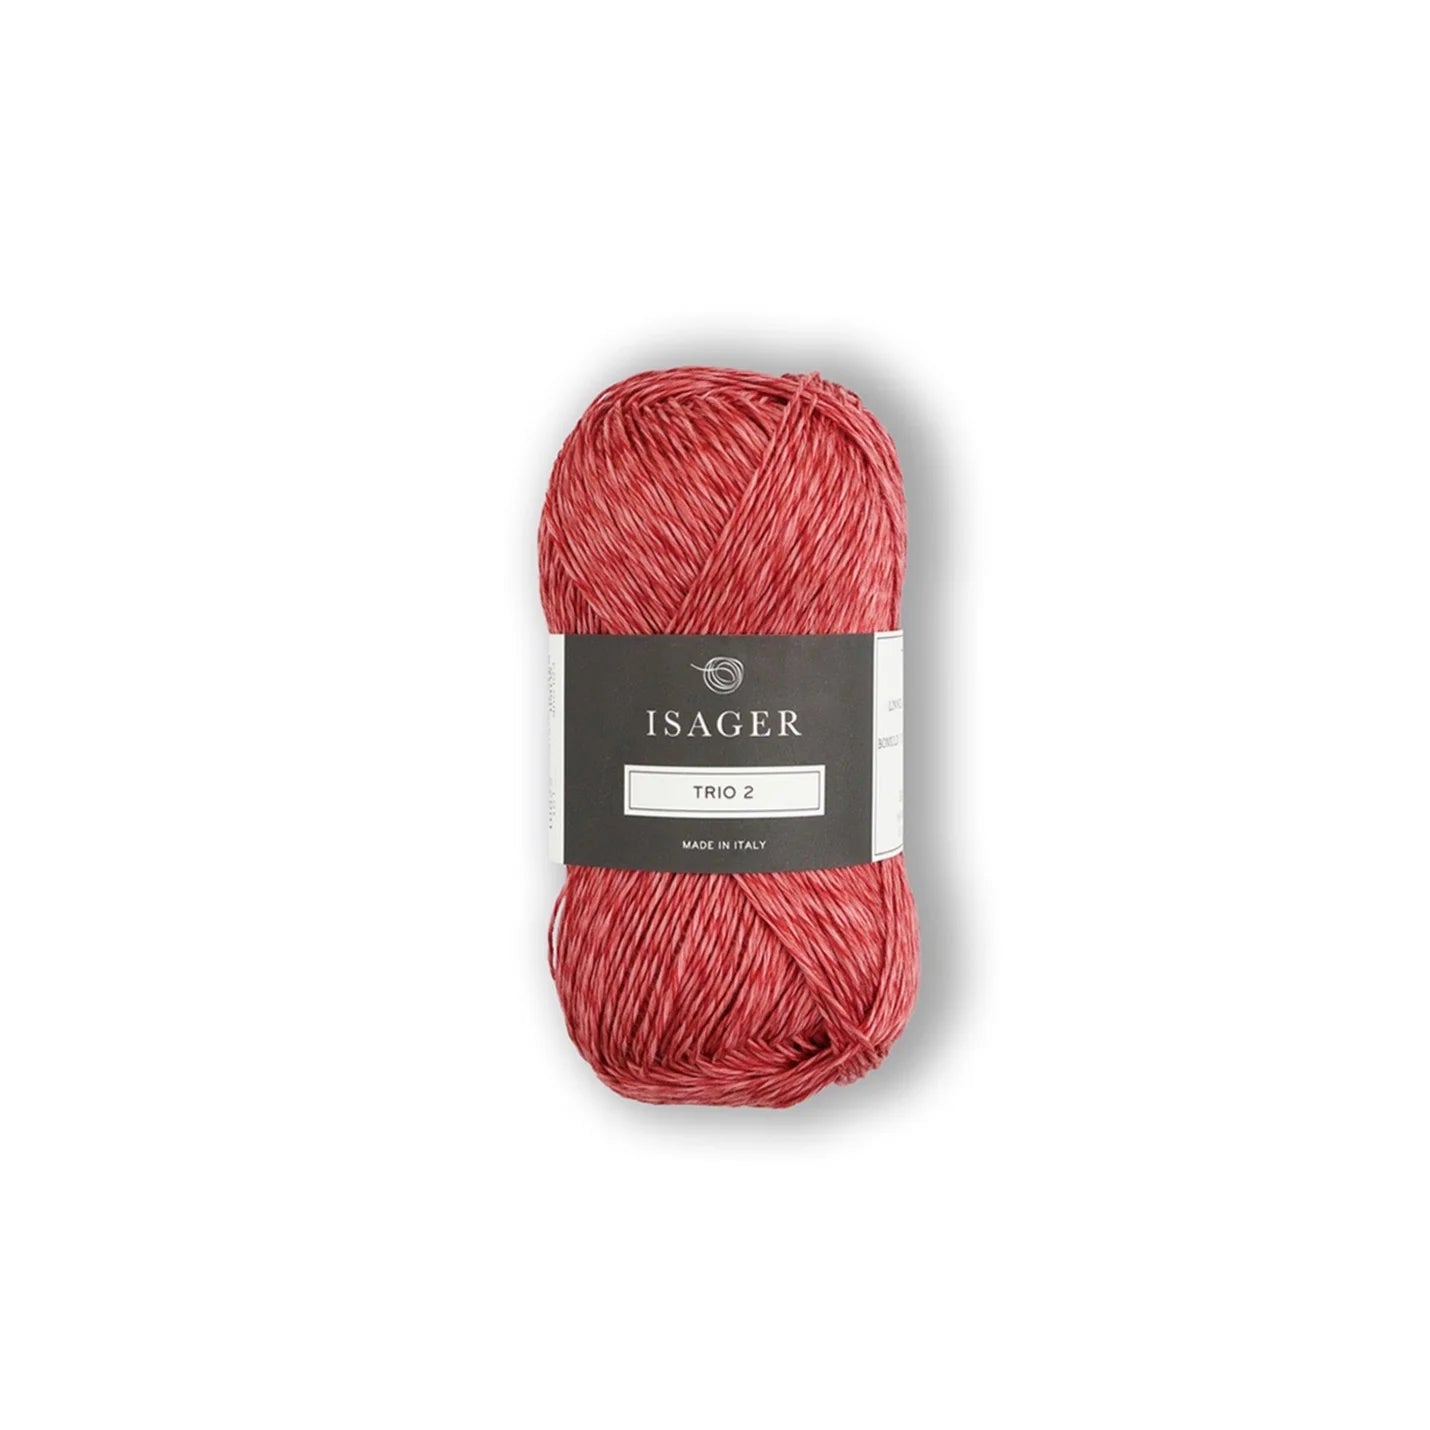 Isager Trio 2 - Blush - 5 Ply - Cotton - The Little Yarn Store